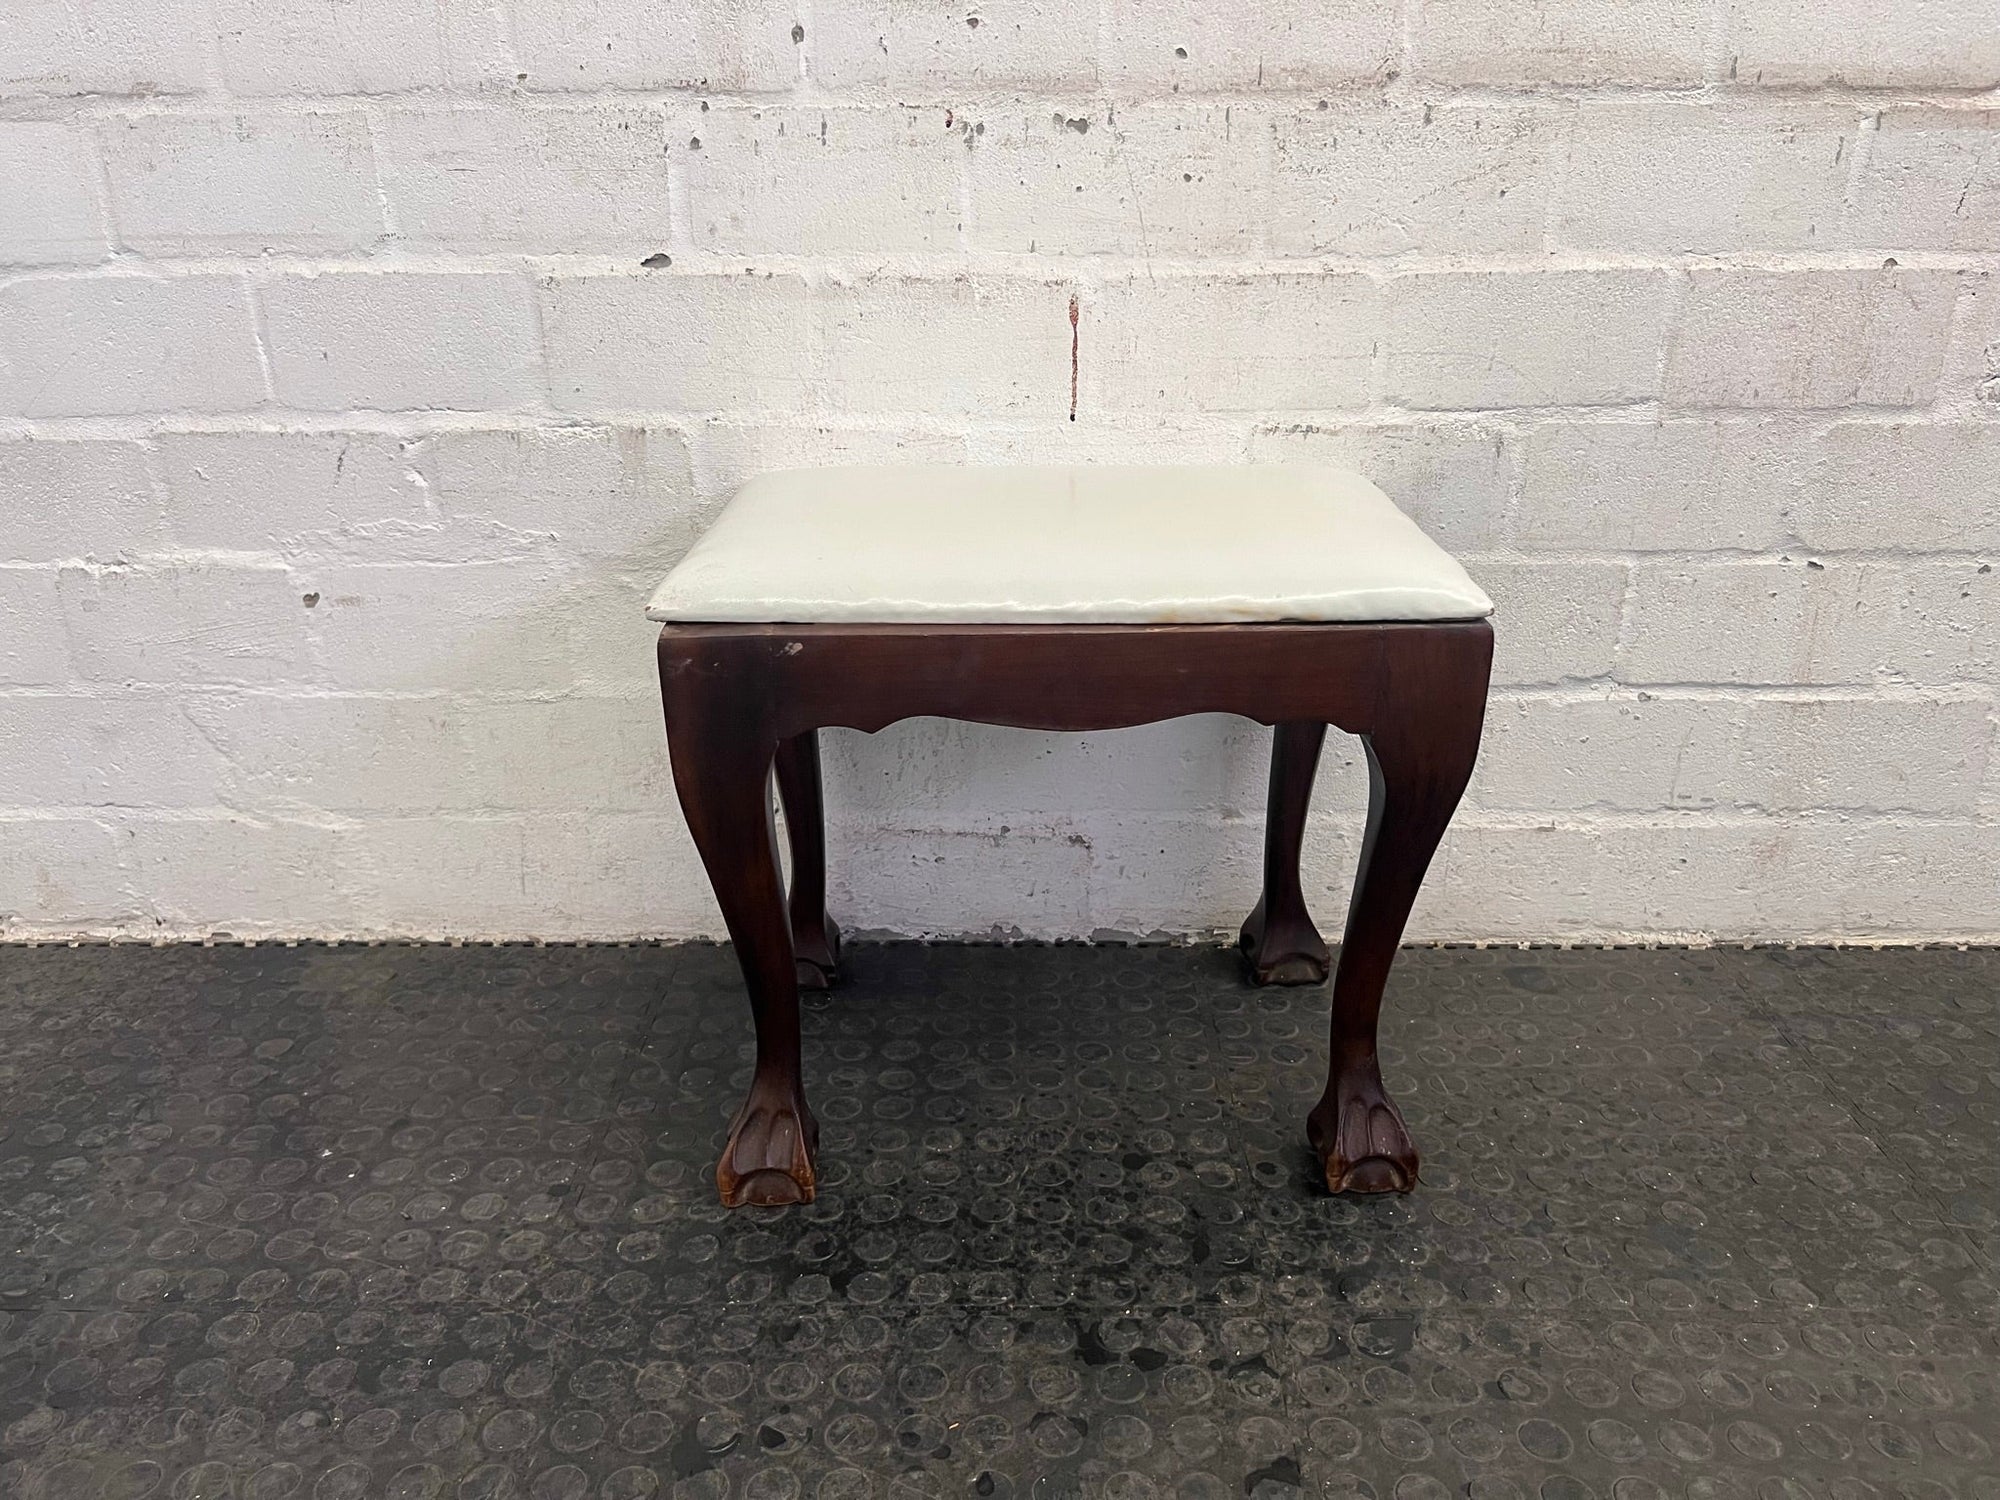 Ball and Claw Dressing Table Stool with White Cushion